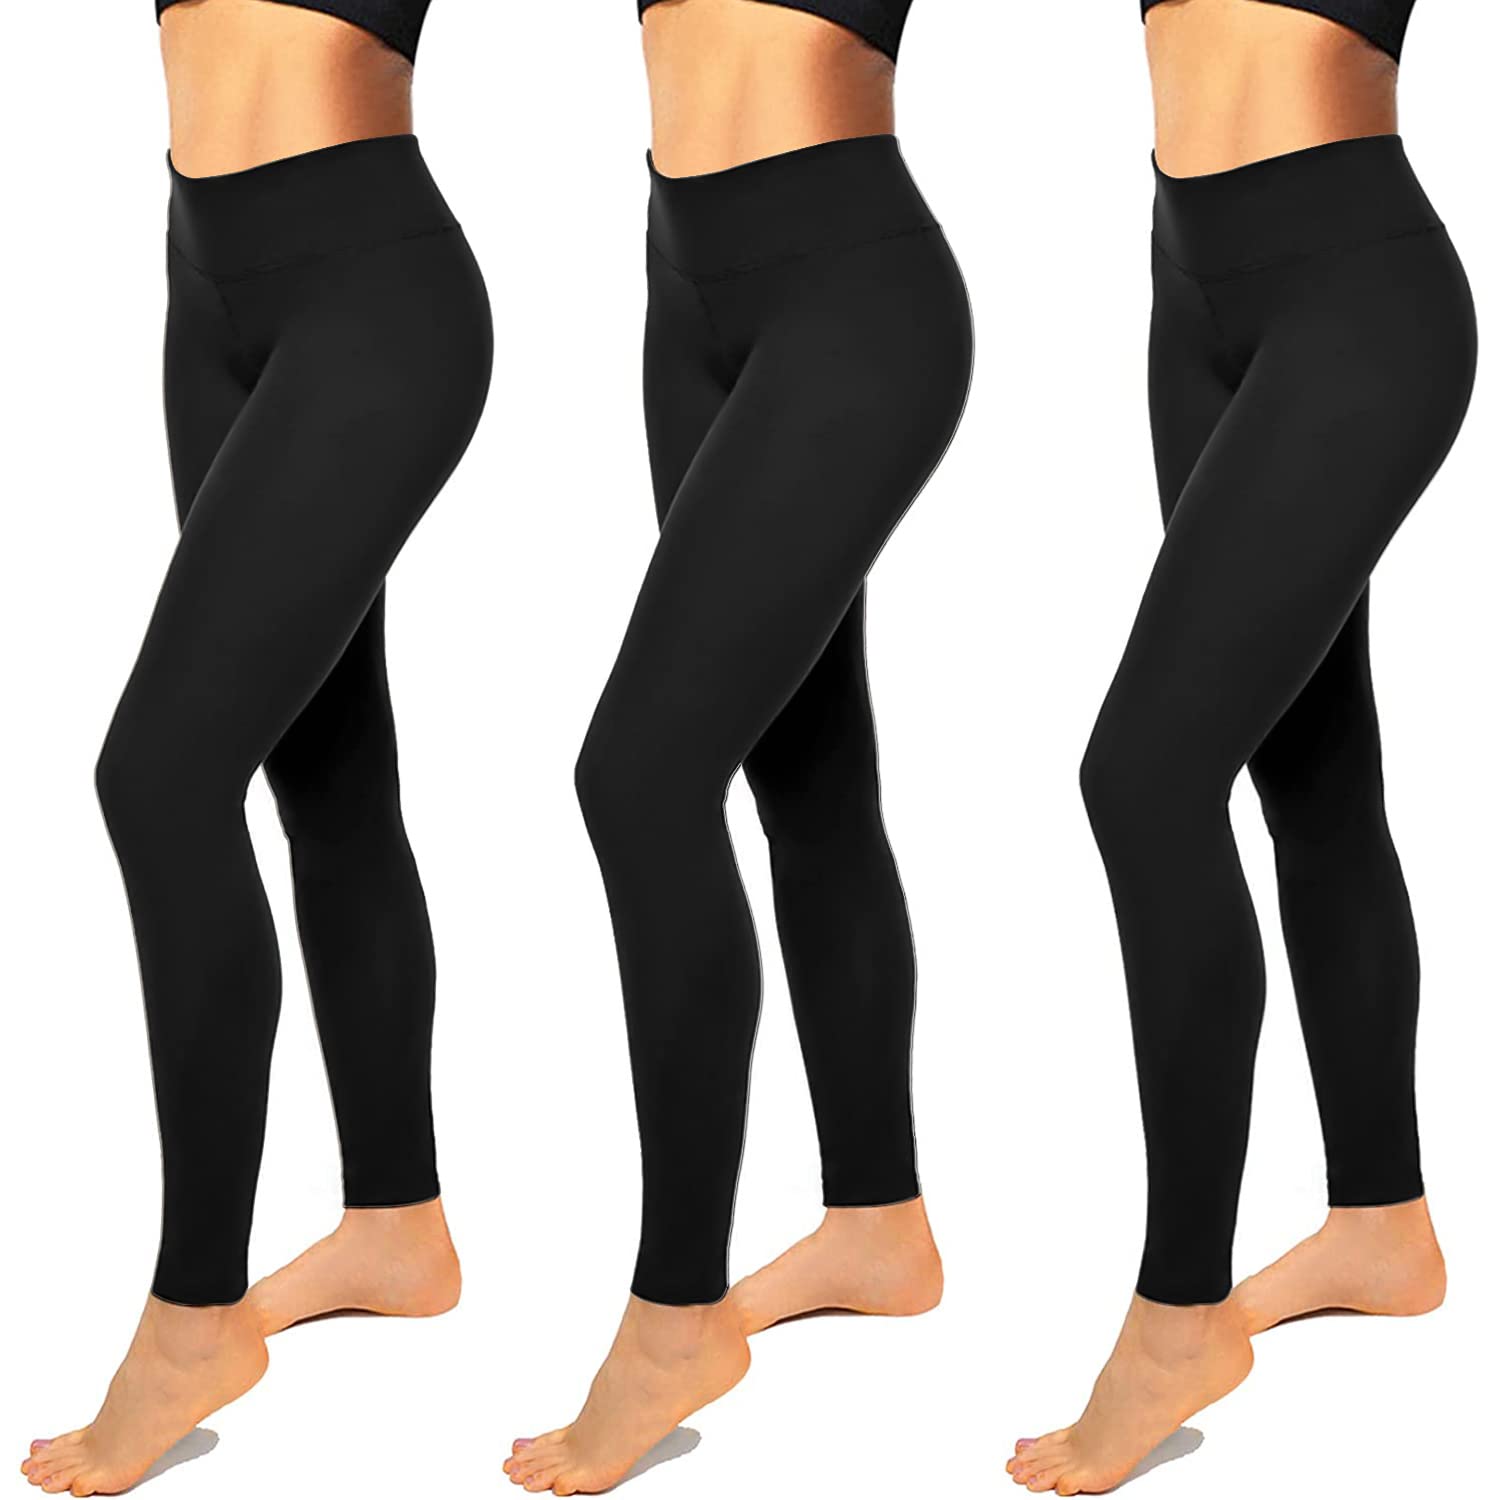 High rise leggings for women to become a versatile and essential wardrobe piece. Their seamless integration into everyday style